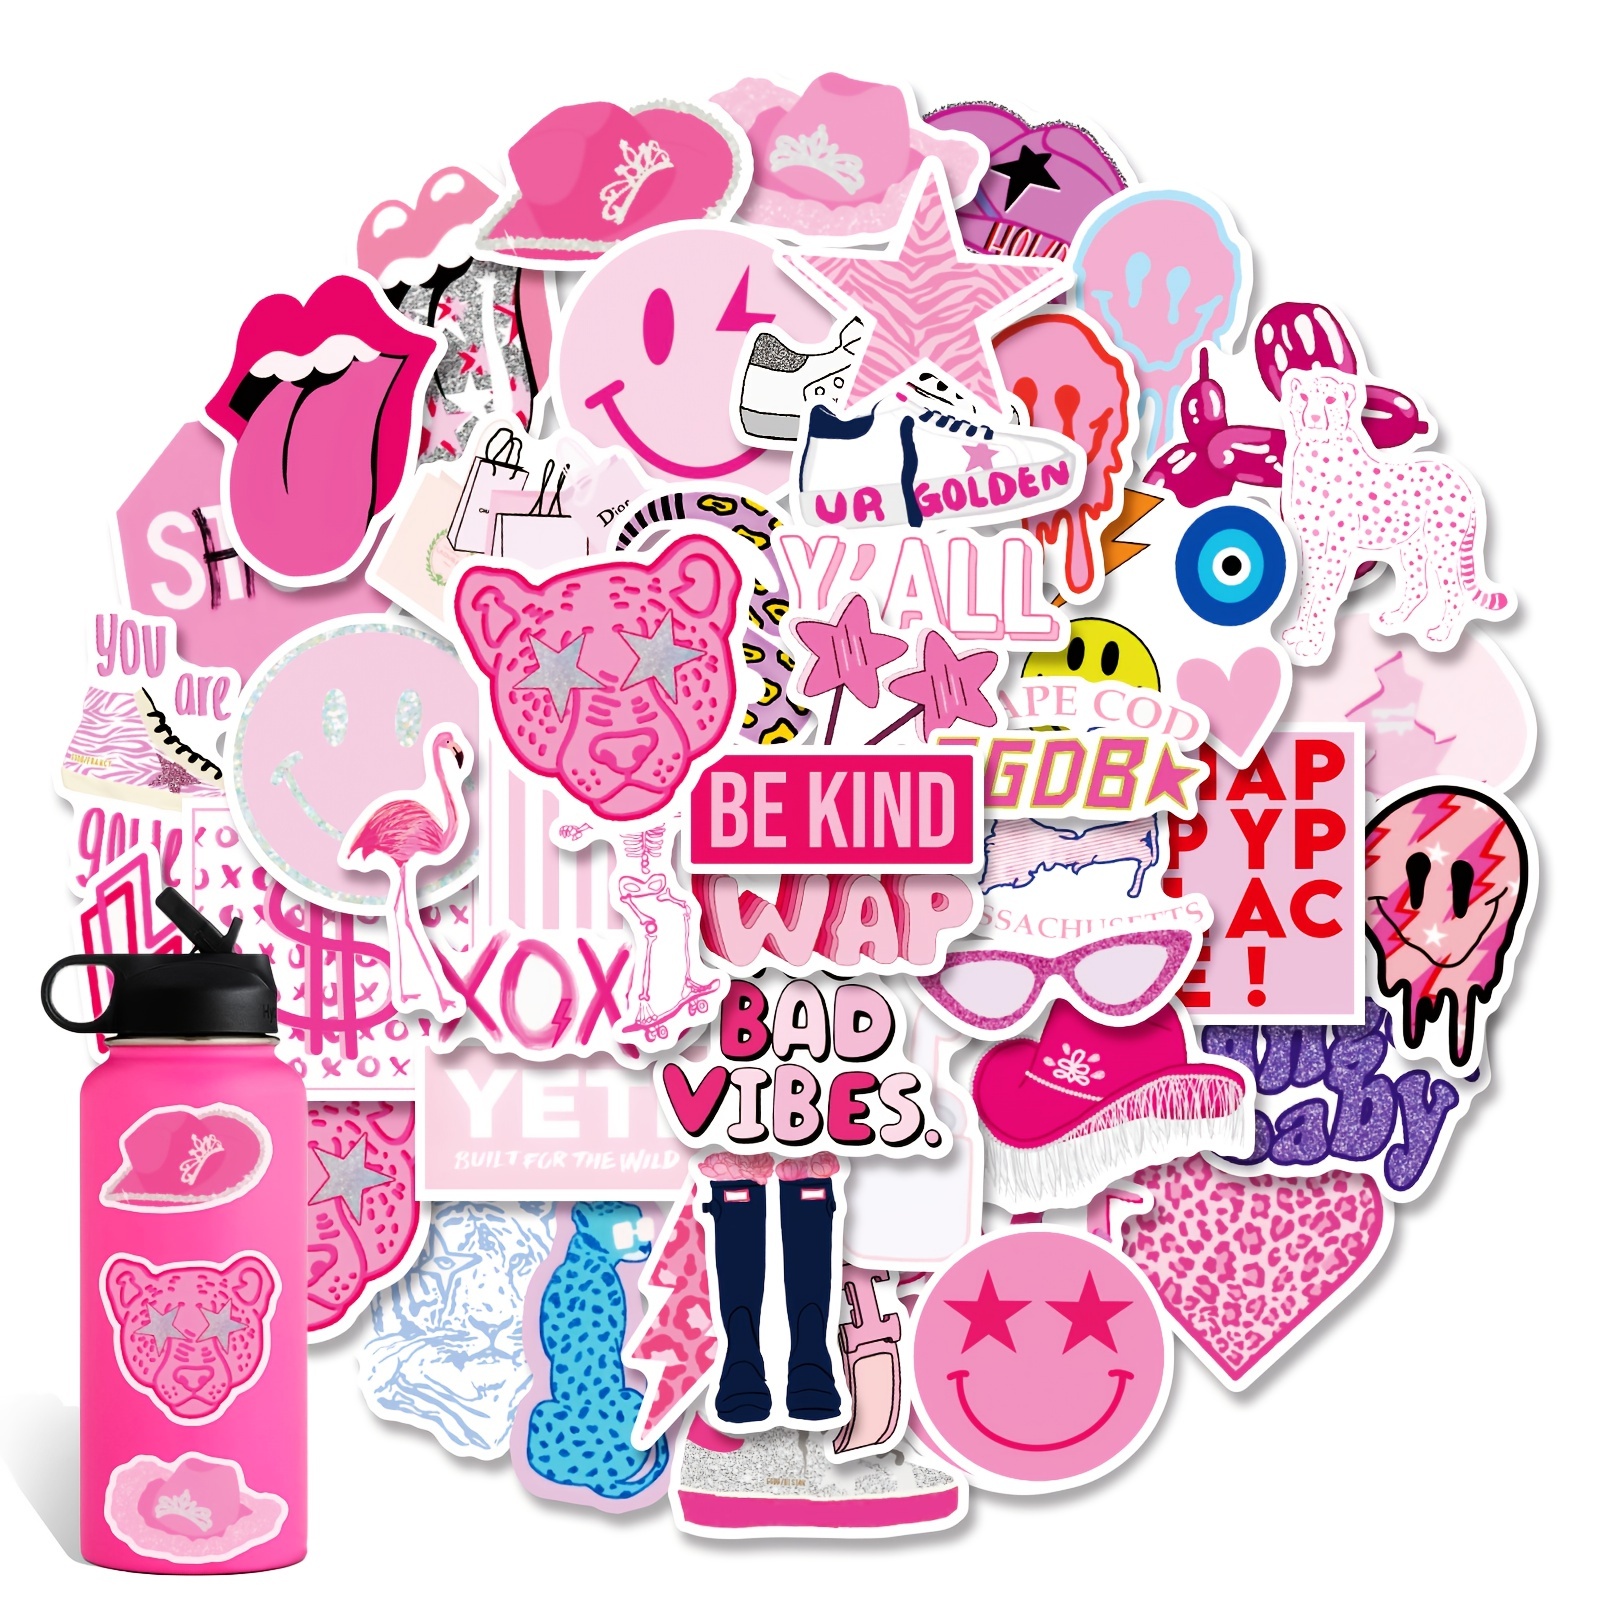 Buy 52pcs Preppy Vinyl Sticker Decor at Our Store - Free Shipping & Returns